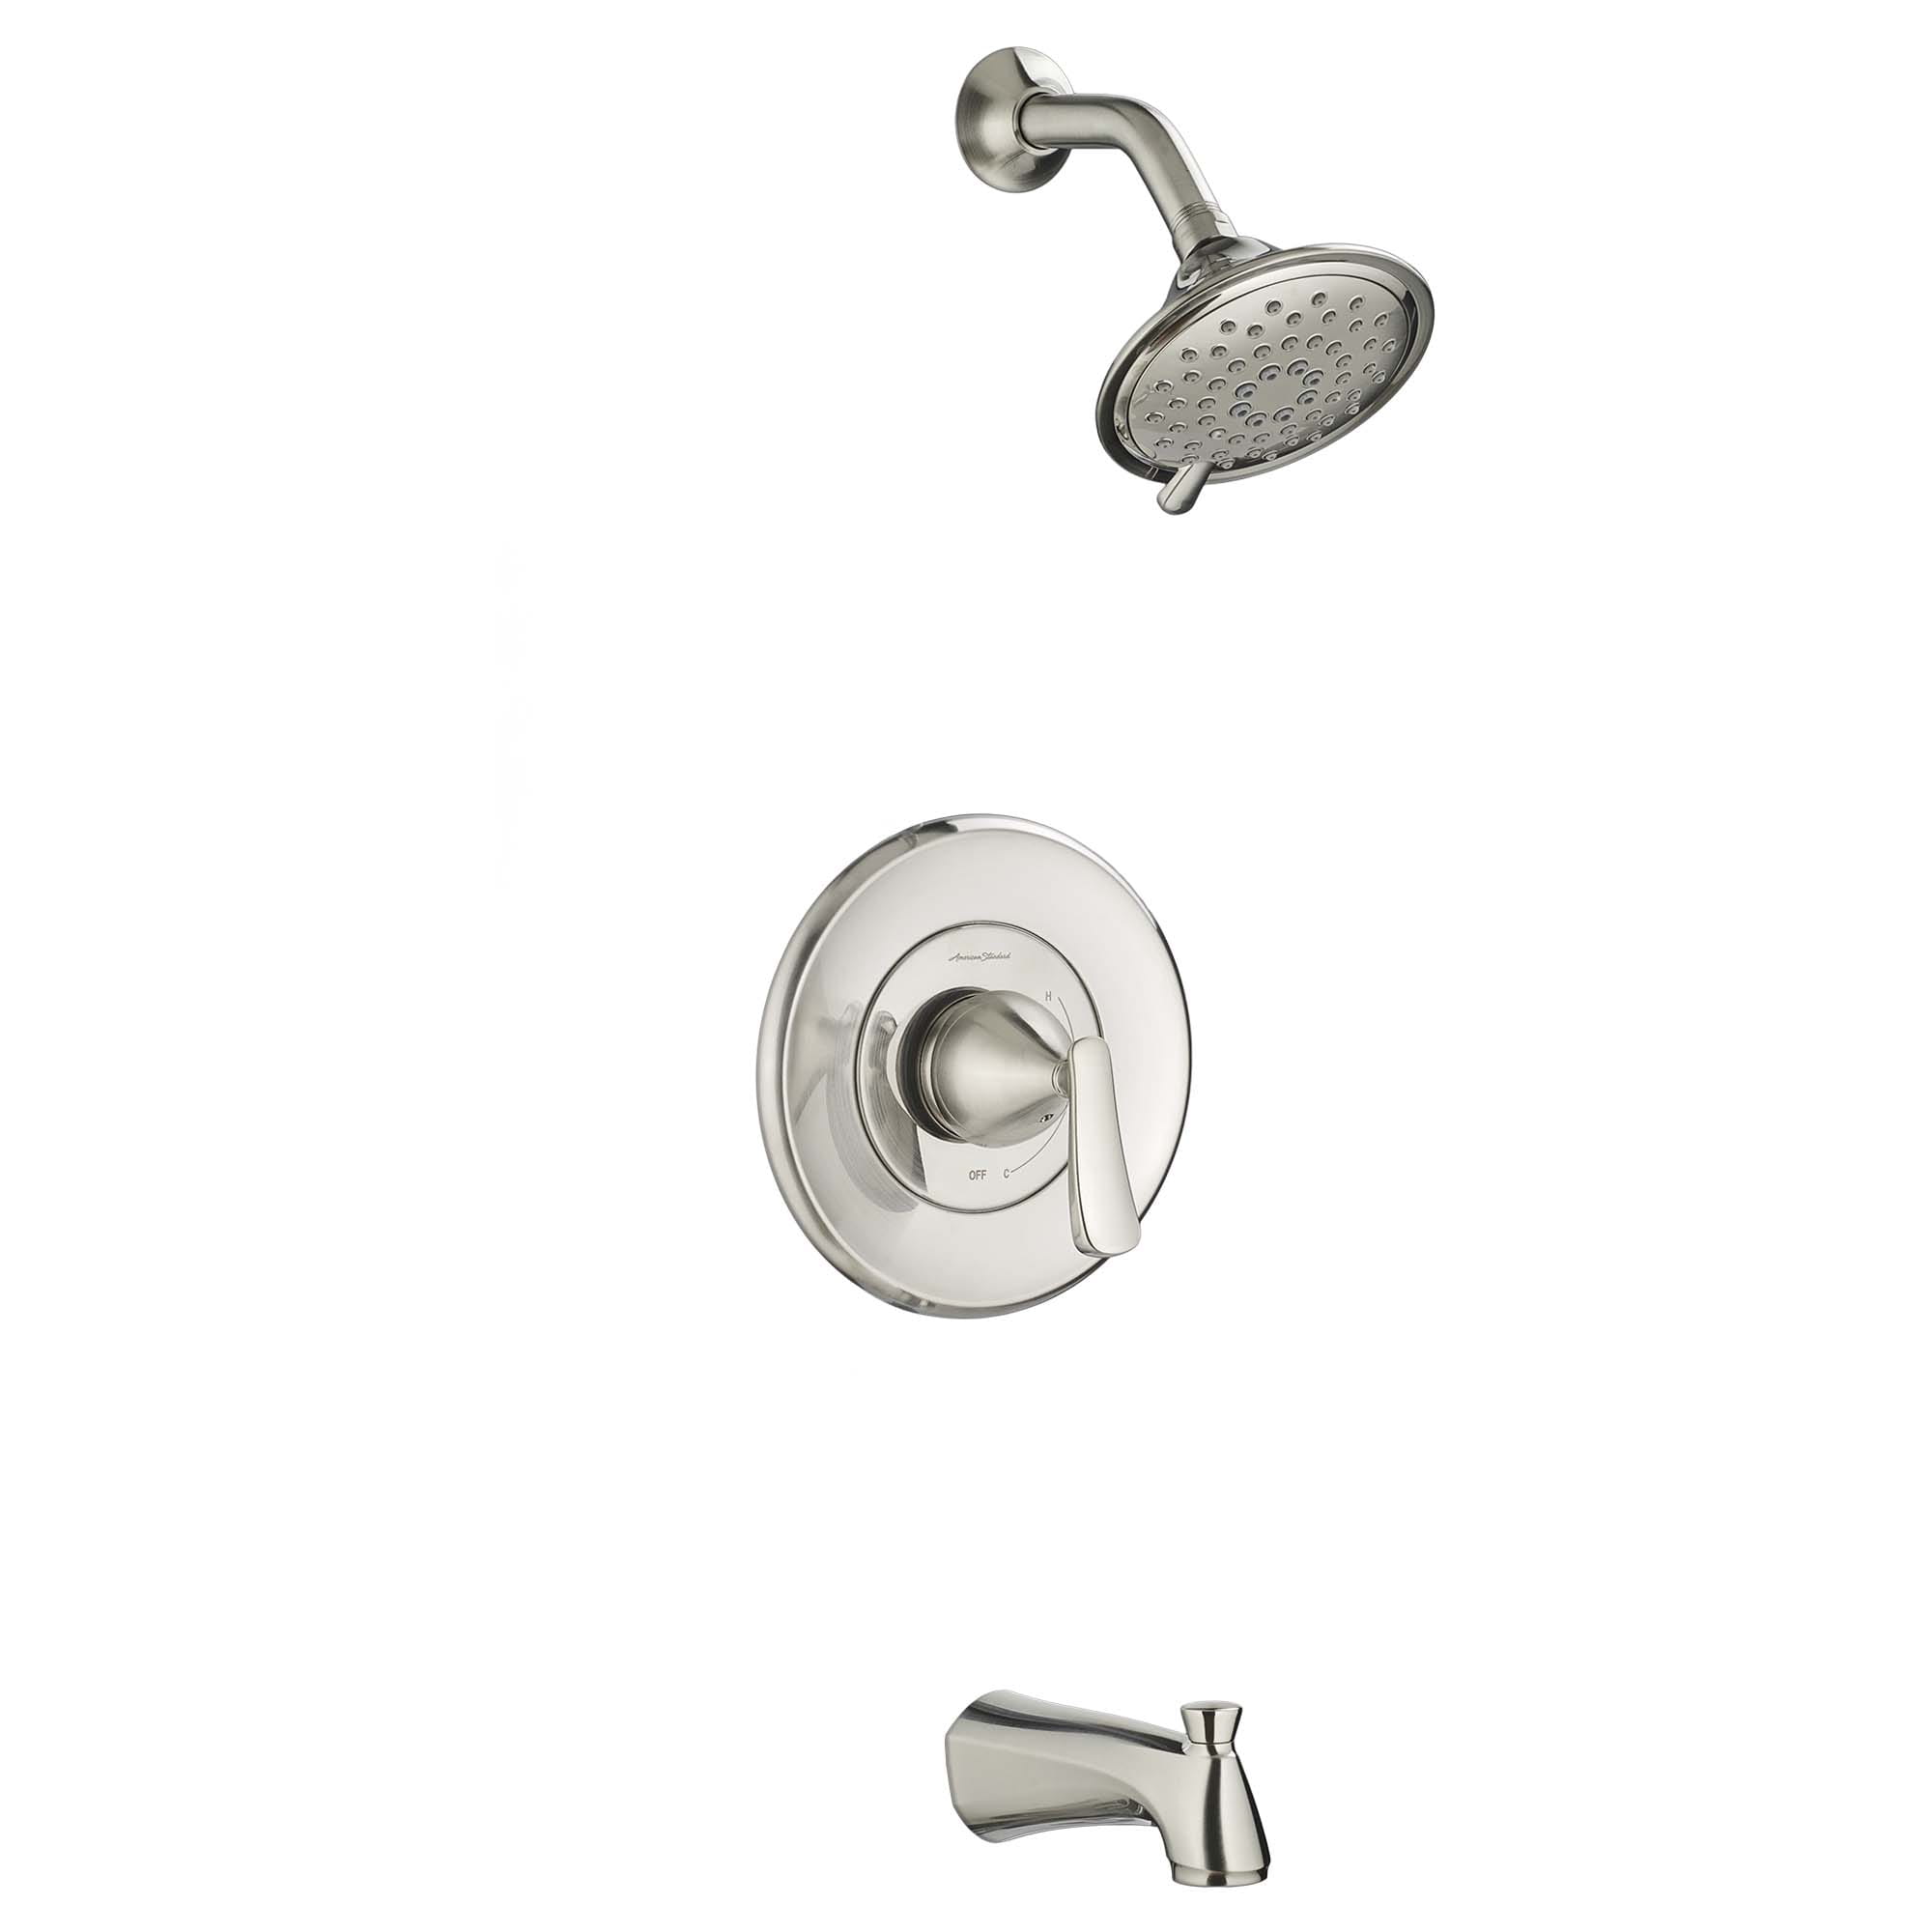 Chatfield 20 GPM Tub and Shower Trim Kit with 3 Function Showerhead Ceramic Disc Valve Cartridge with Lever Handle   BRUSHED NICKEL